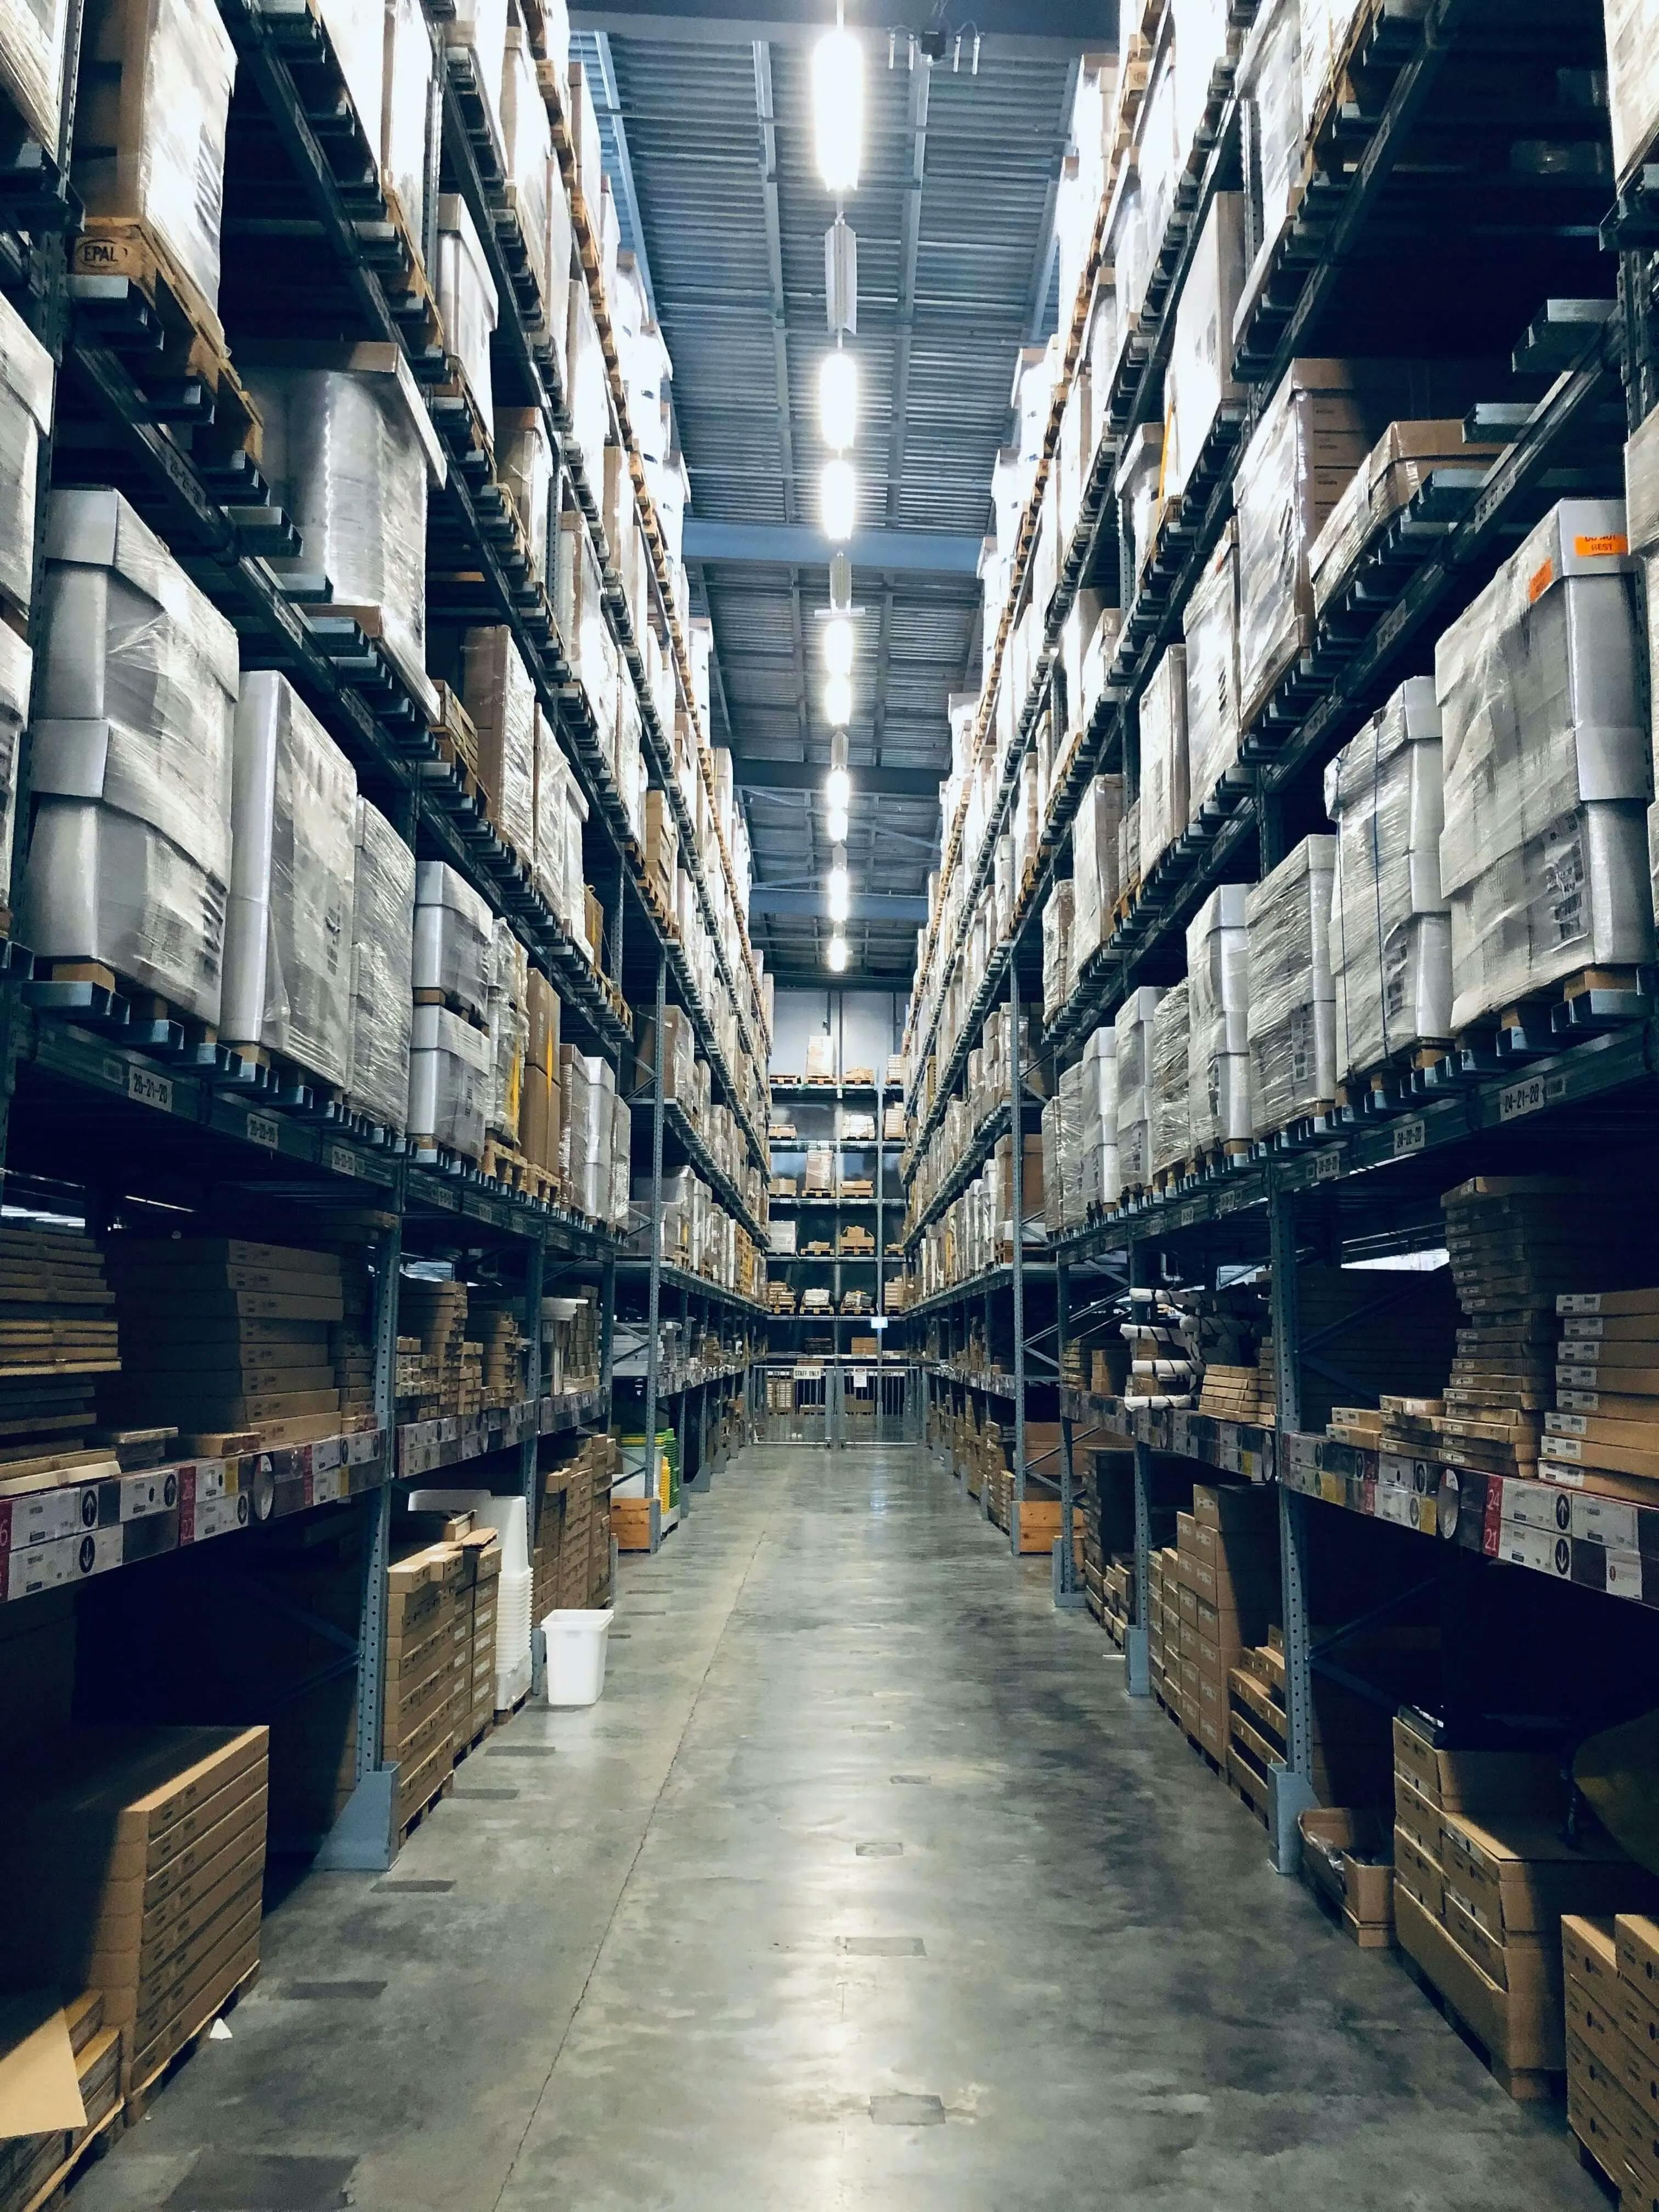 A spacious warehouse filled with numerous shelves and boxes, providing ample storage capacity.